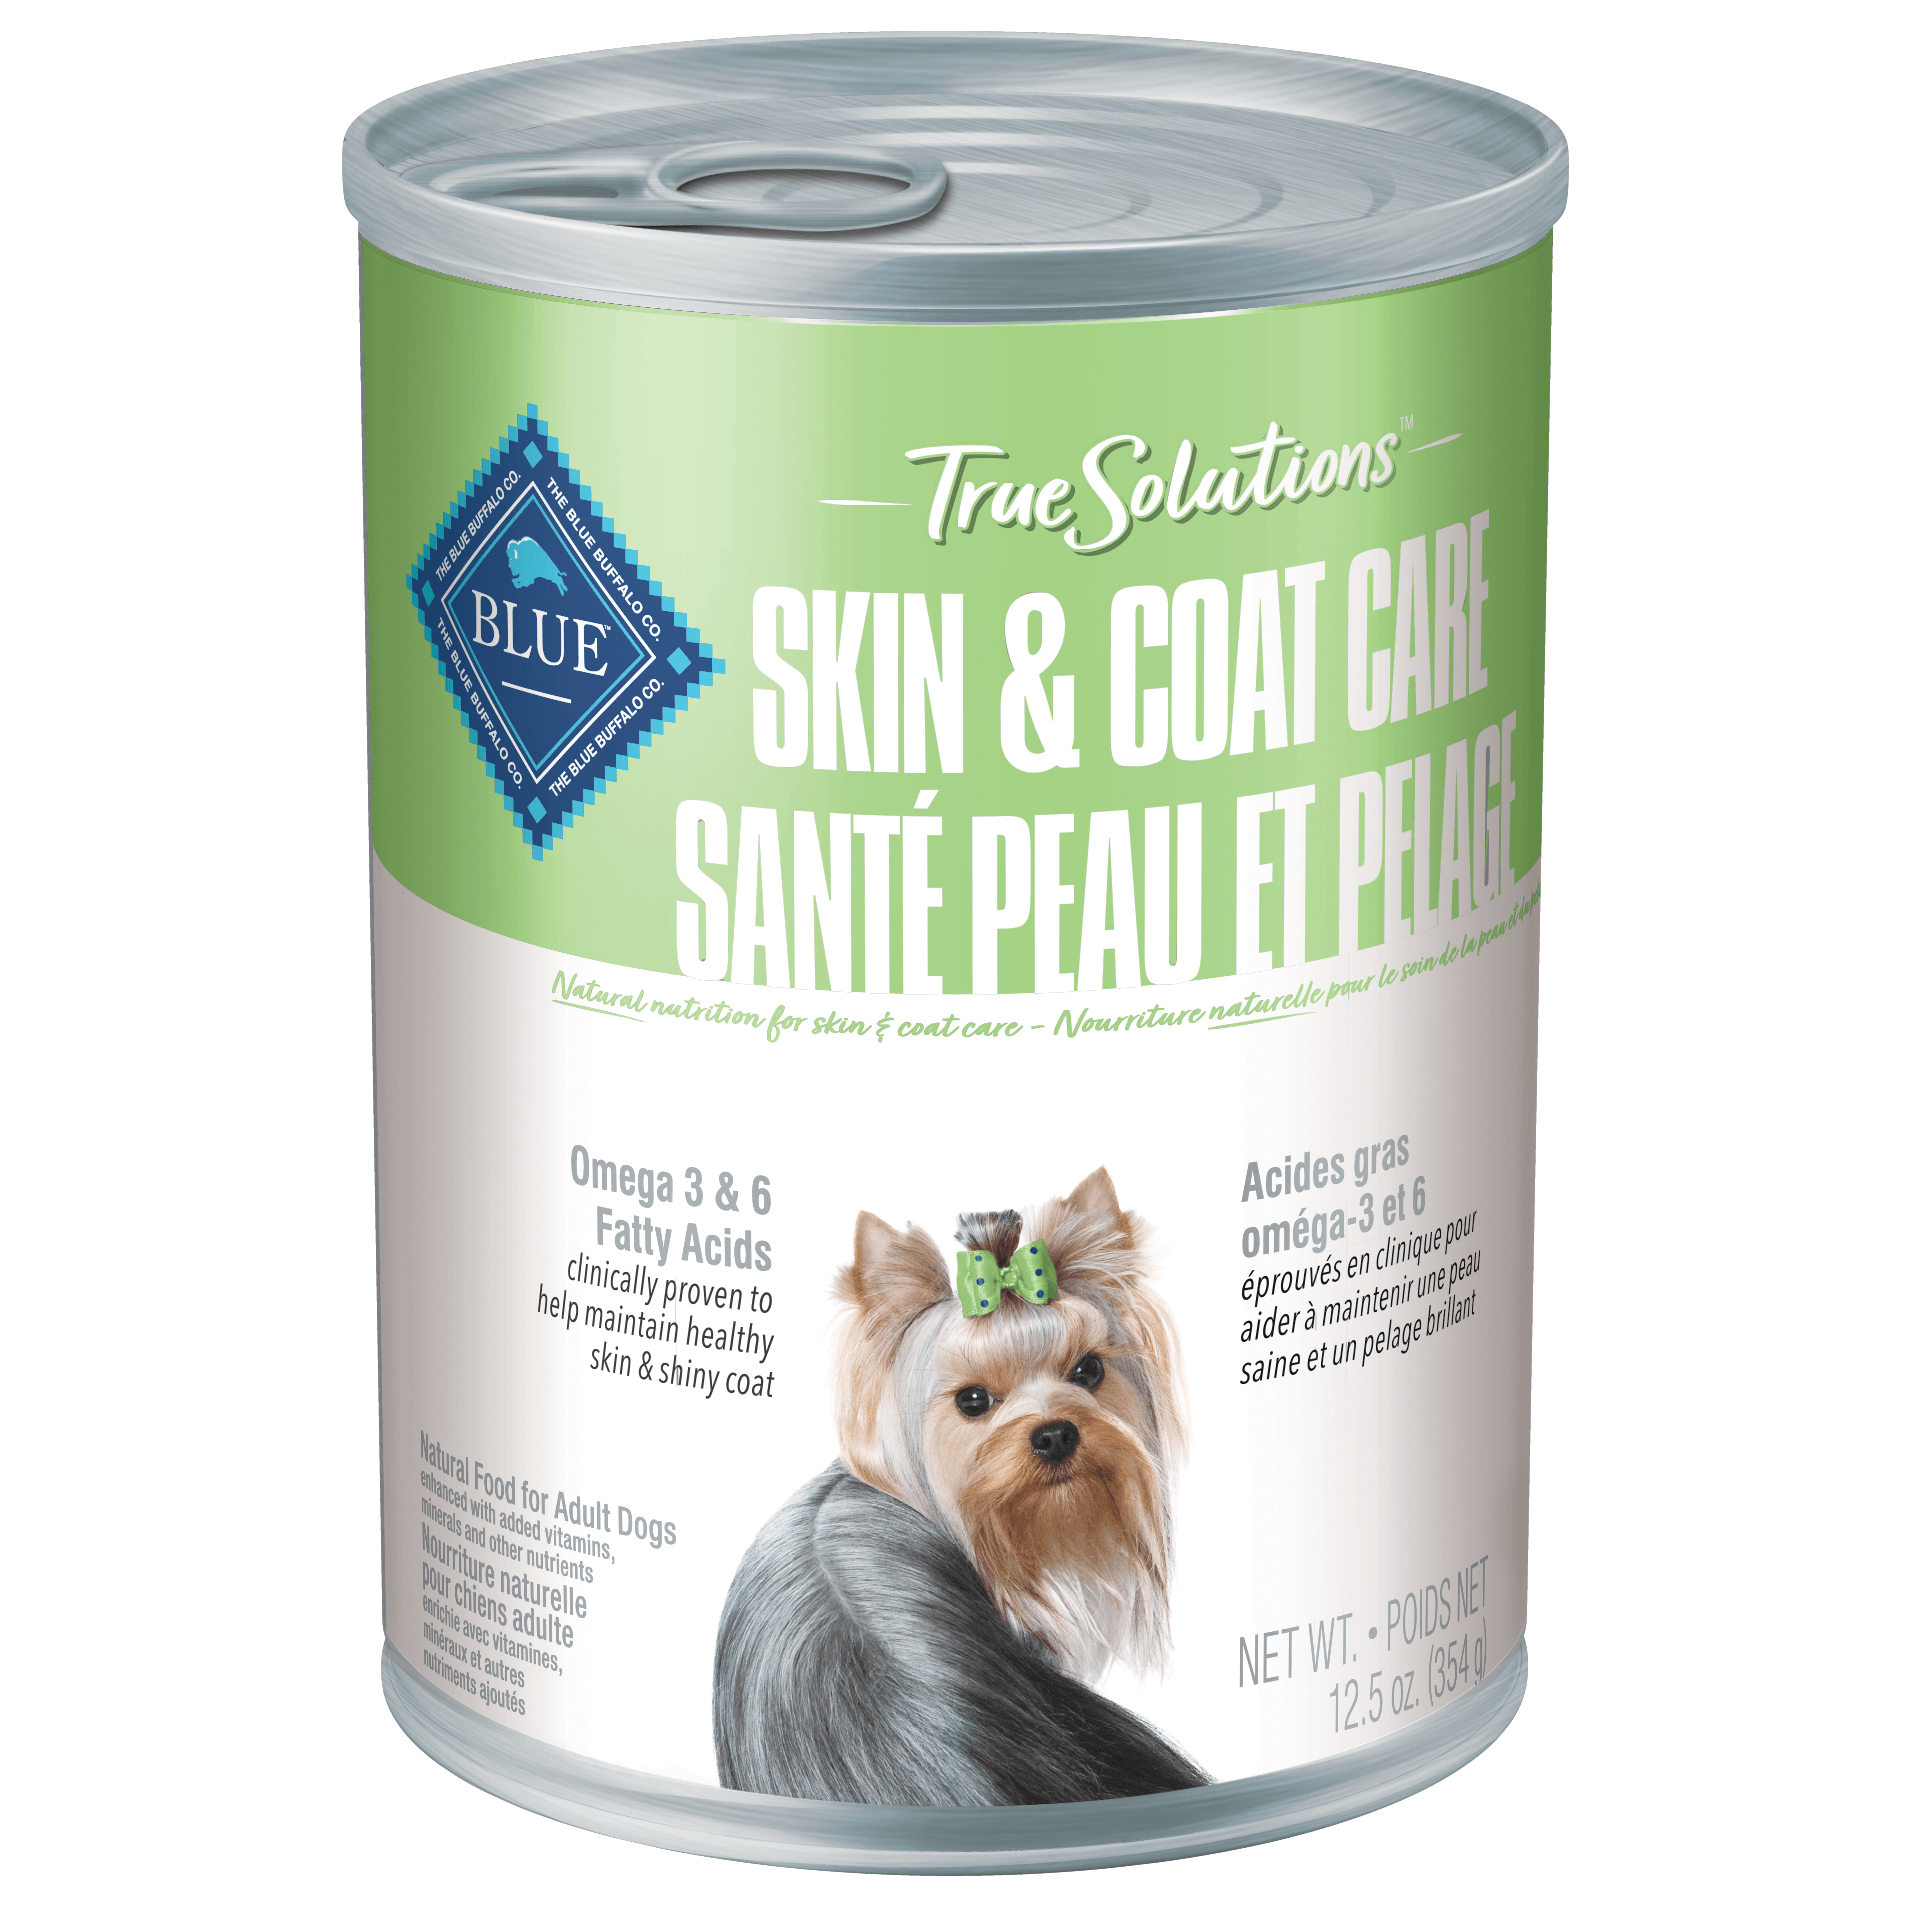 Blue True Solutions Canned Dog Food Skin & Coat Care 354g Canned Dog Food 354g | PetMax Canada